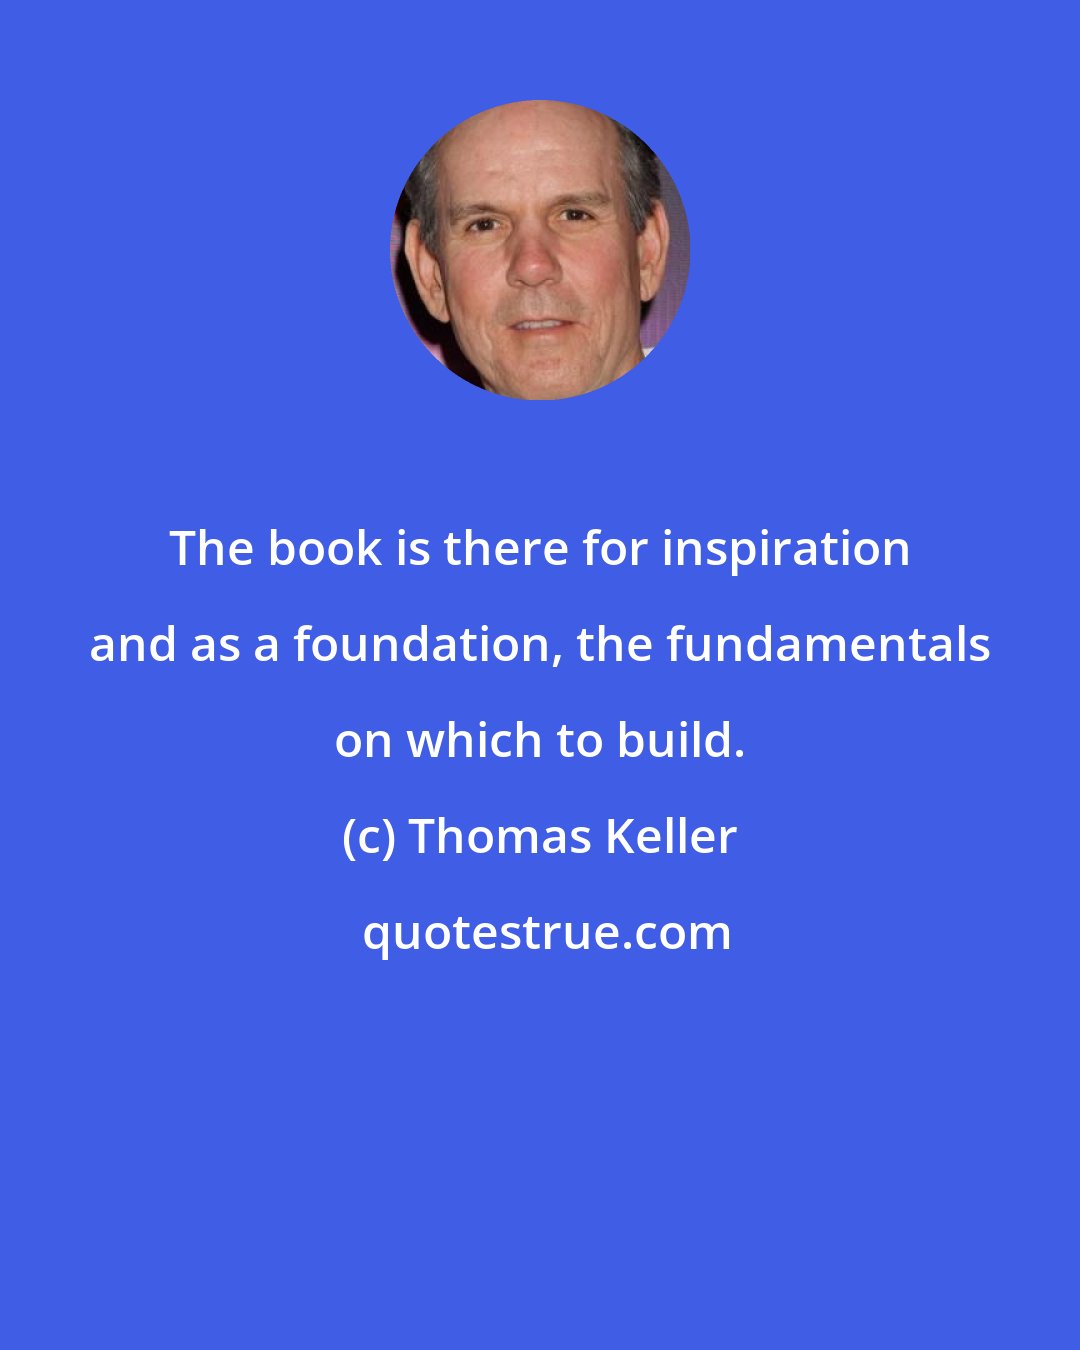 Thomas Keller: The book is there for inspiration and as a foundation, the fundamentals on which to build.